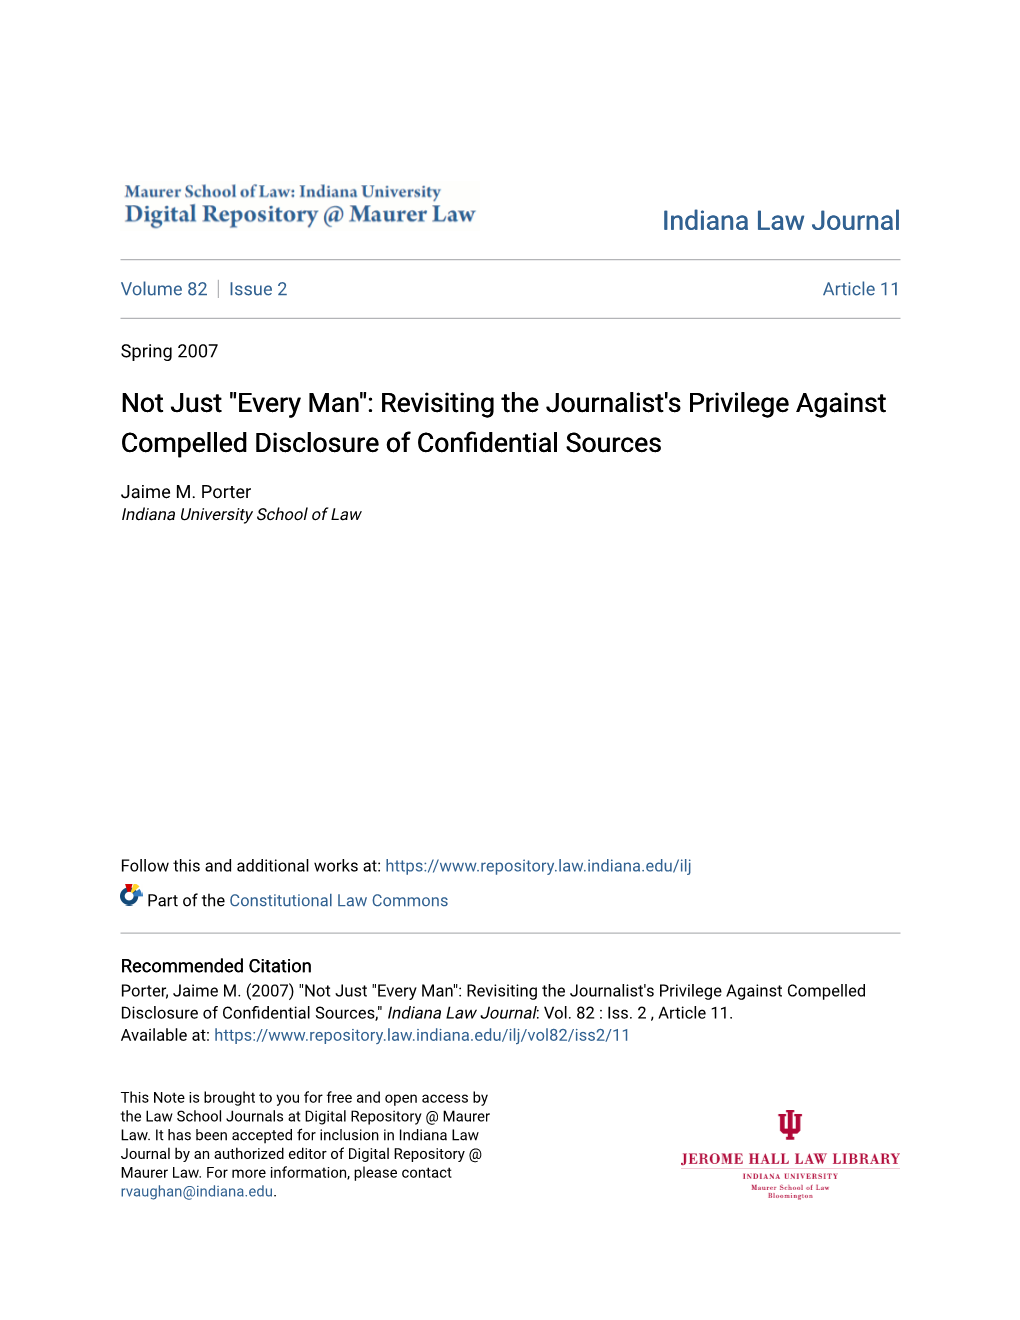 Revisiting the Journalist's Privilege Against Compelled Disclosure of Confidential Sources